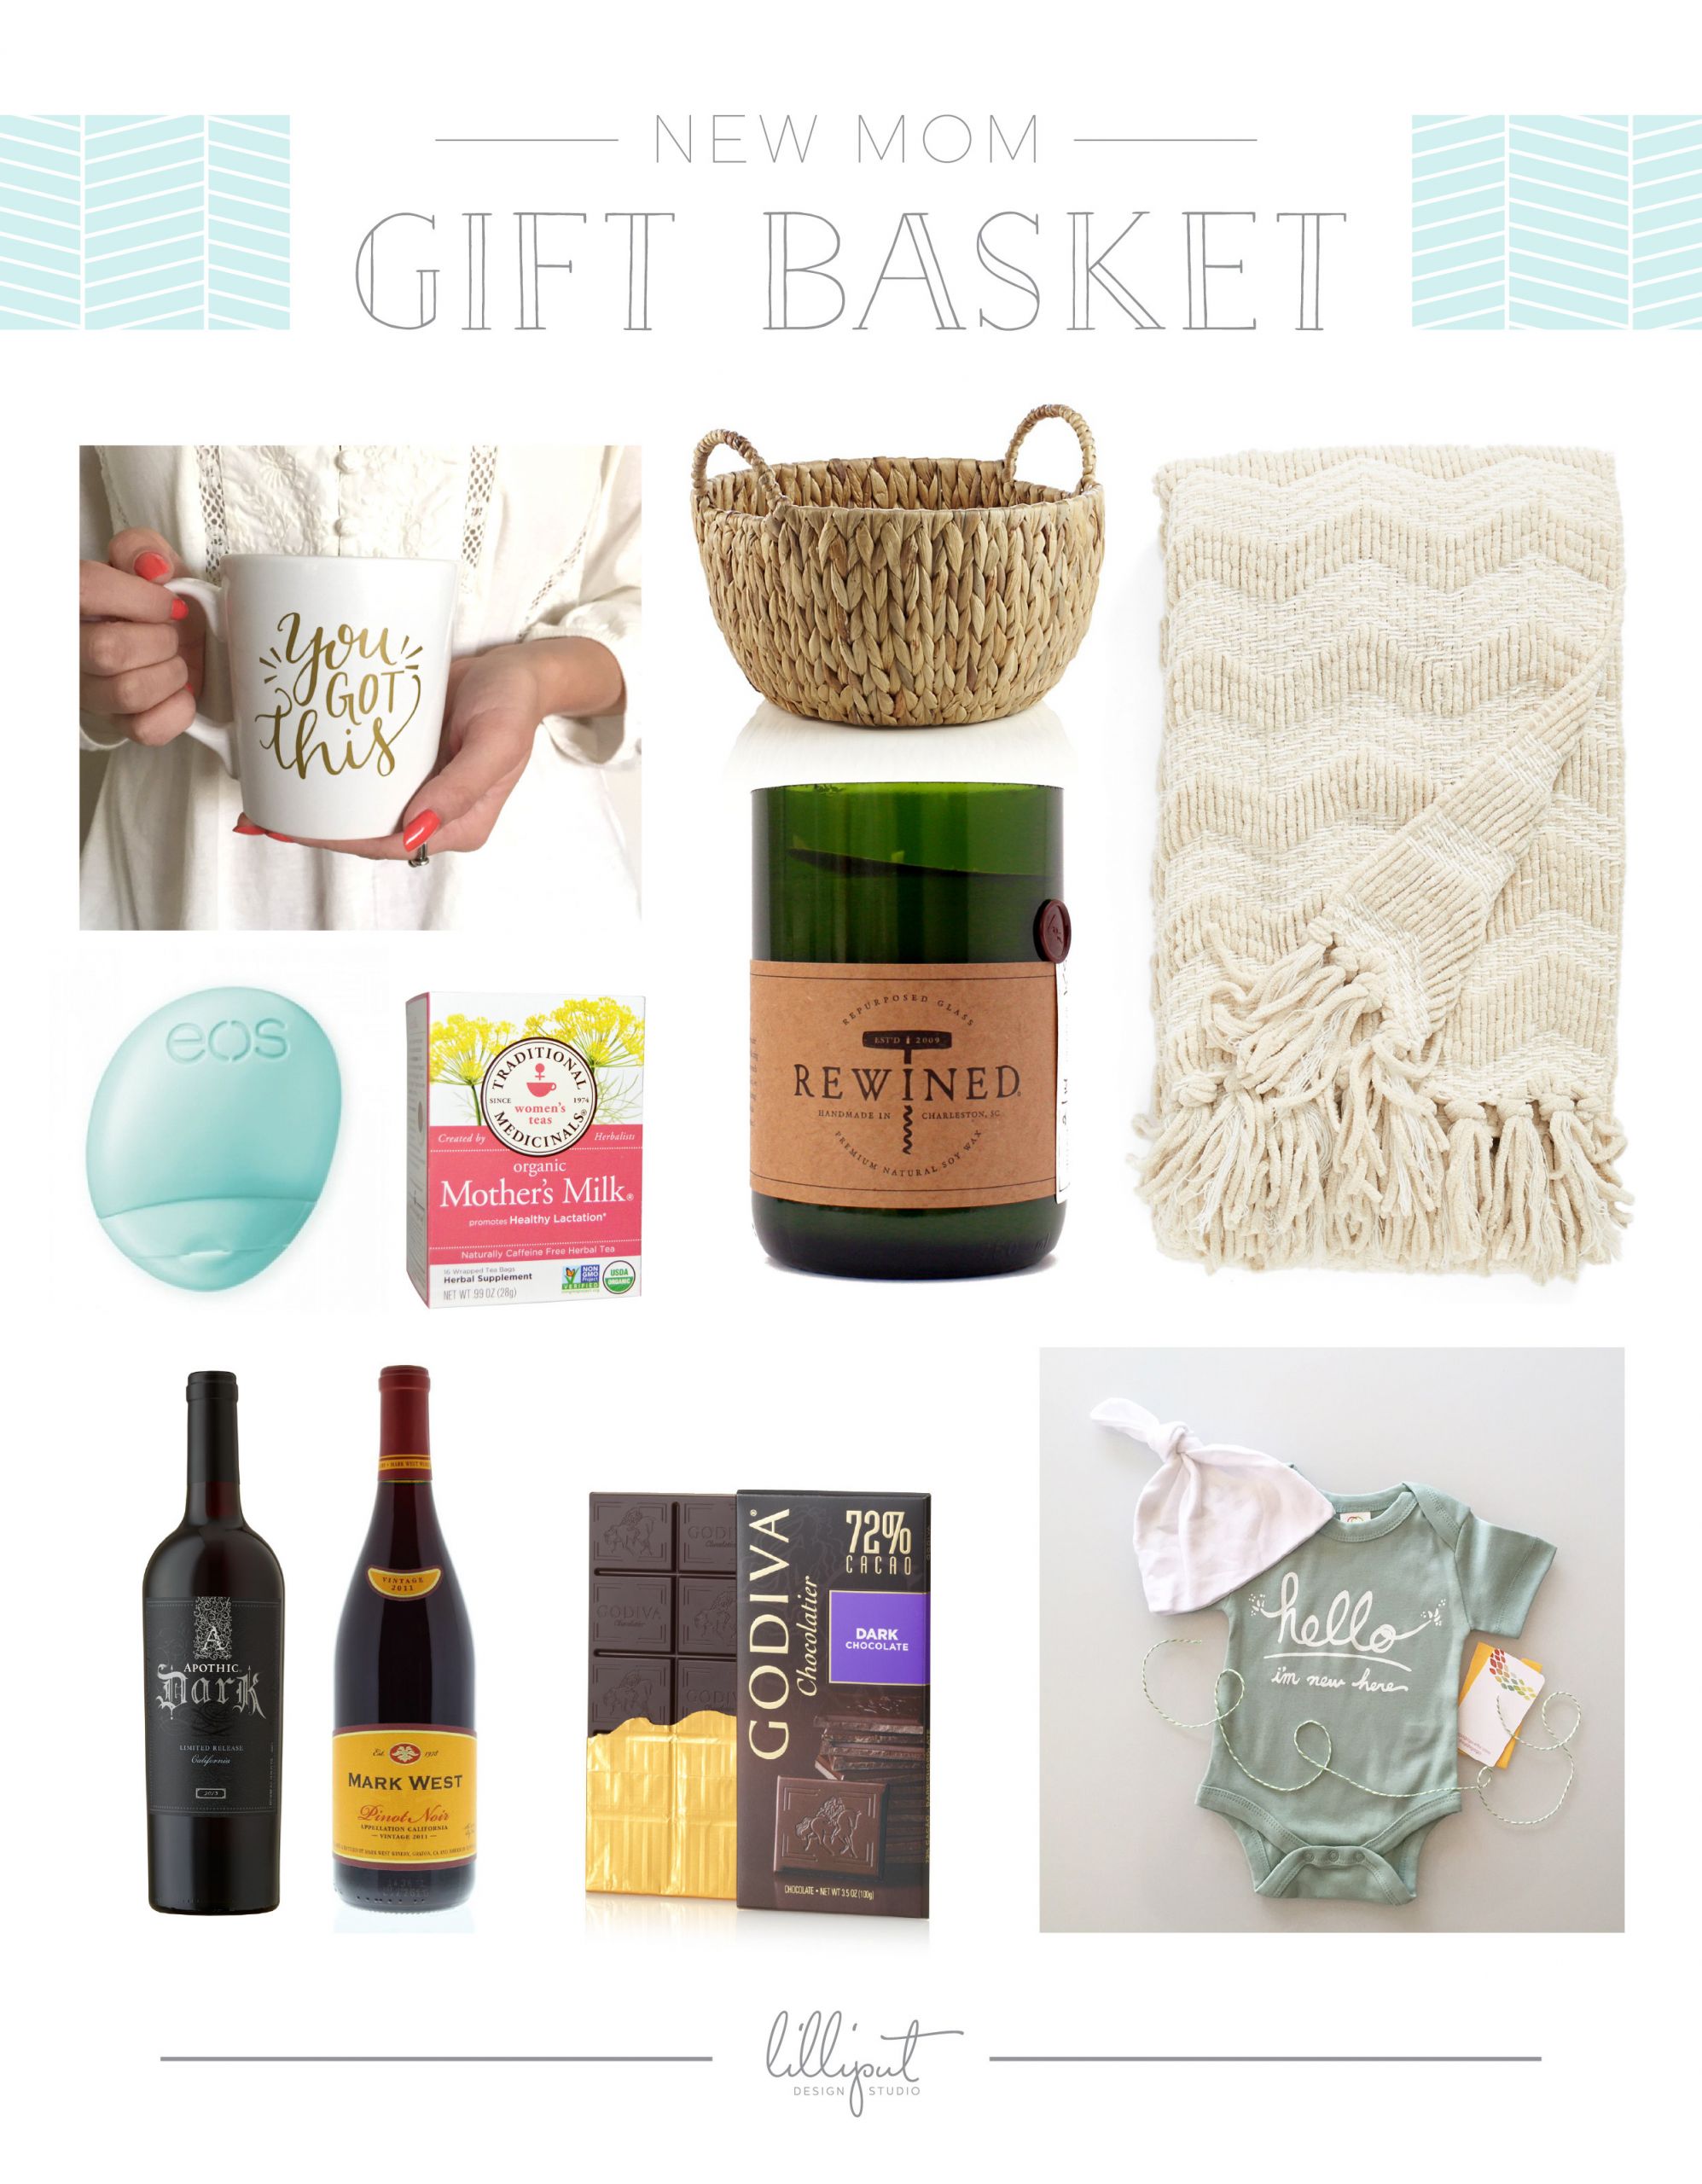 New Mum Christmas Gift Ideas
 Gifts for New